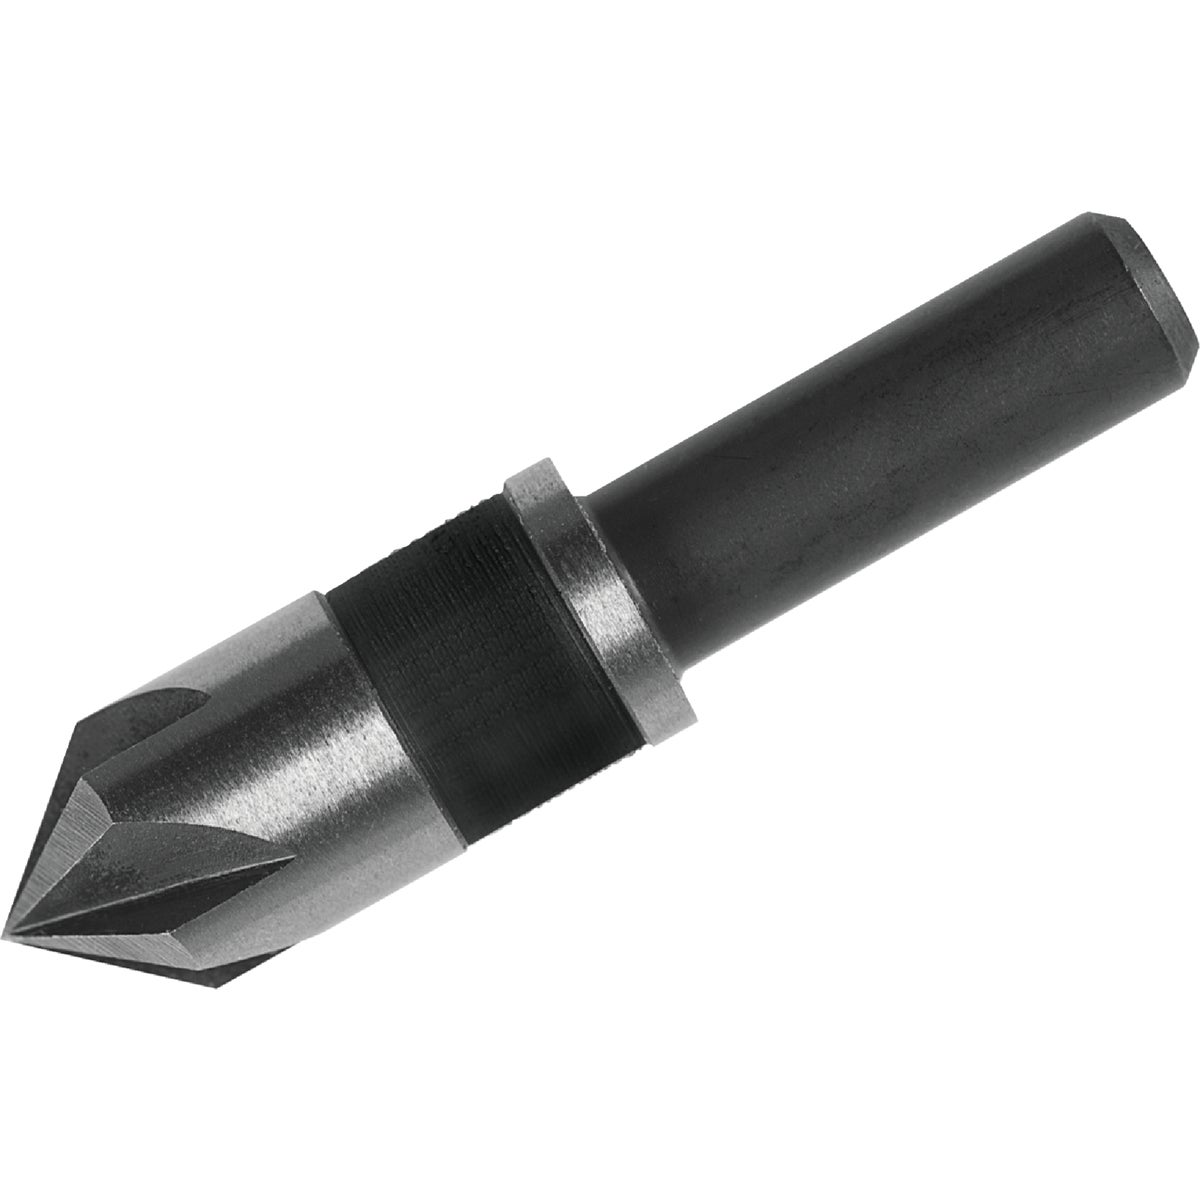 Irwin 3/8 In. Round Most Machineable Metals Countersink